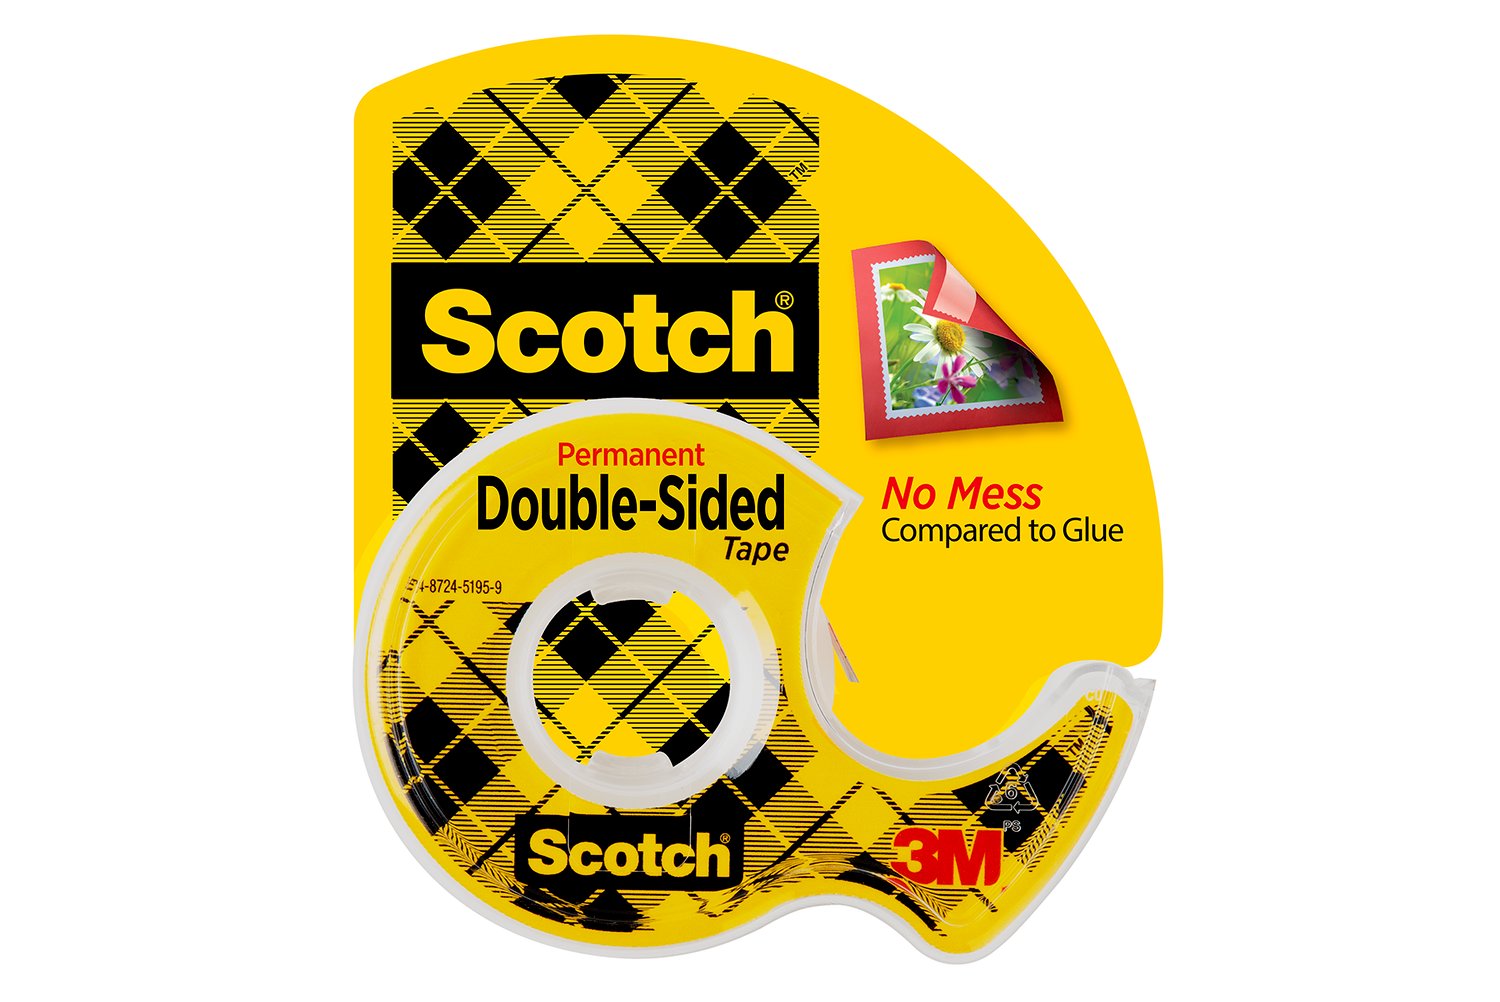 7100275742 - Scotch Double Sided Tape 136, 1/2 in x 250 in (12.7 mm x 6.3 m)